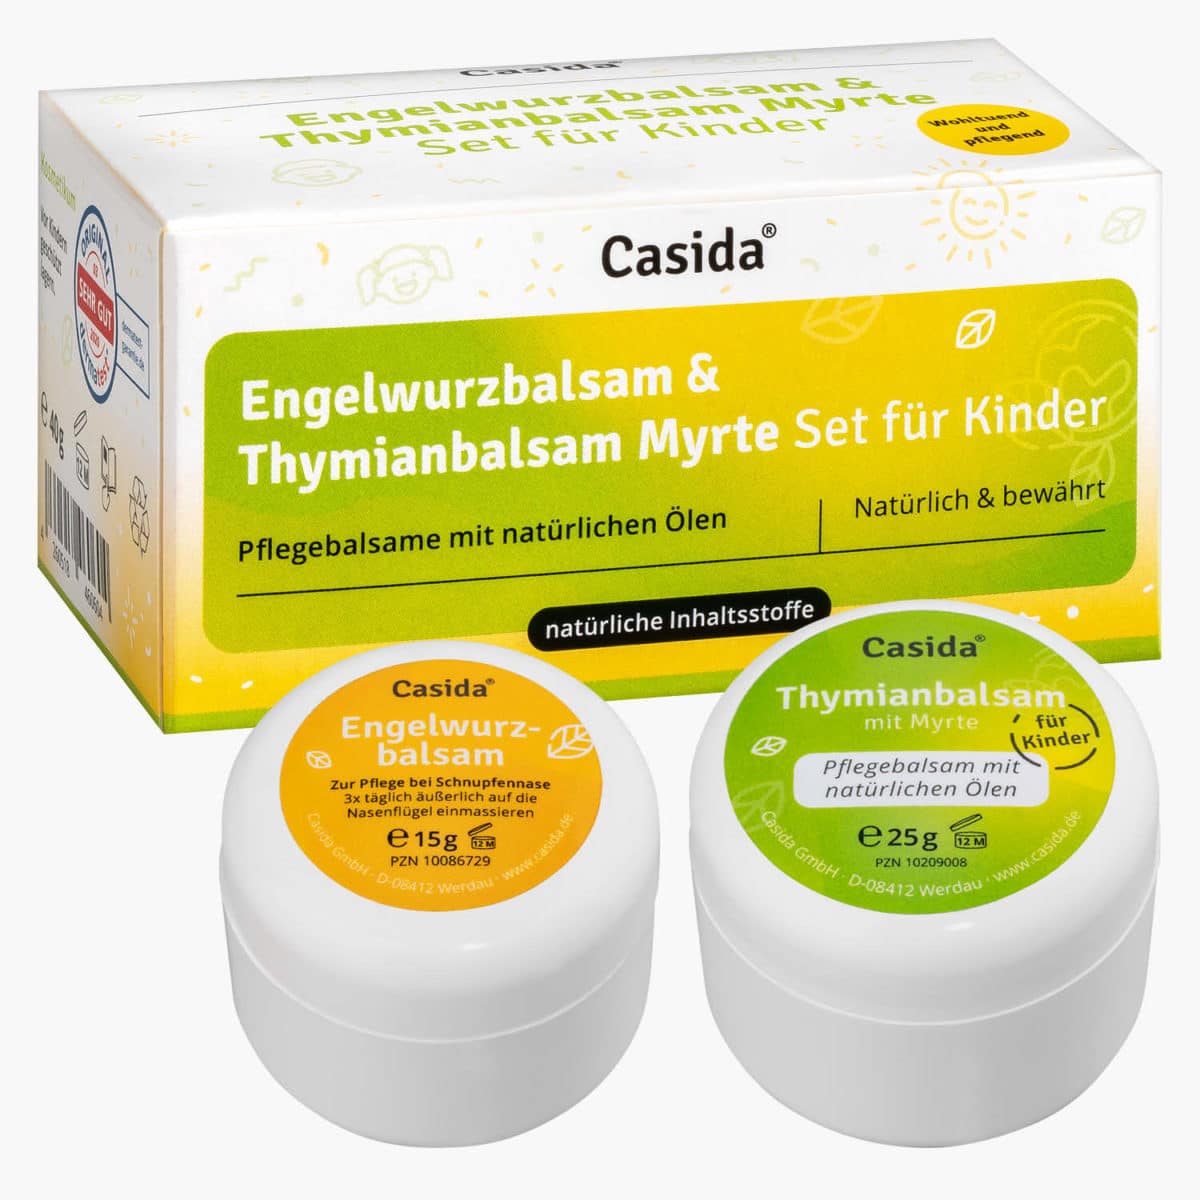 Casida Product Combo Angelica Balm and Thyme Balm for Children 10209008 10086729 PZN Apotheke Erkältung Baby pflanzlich behandeln